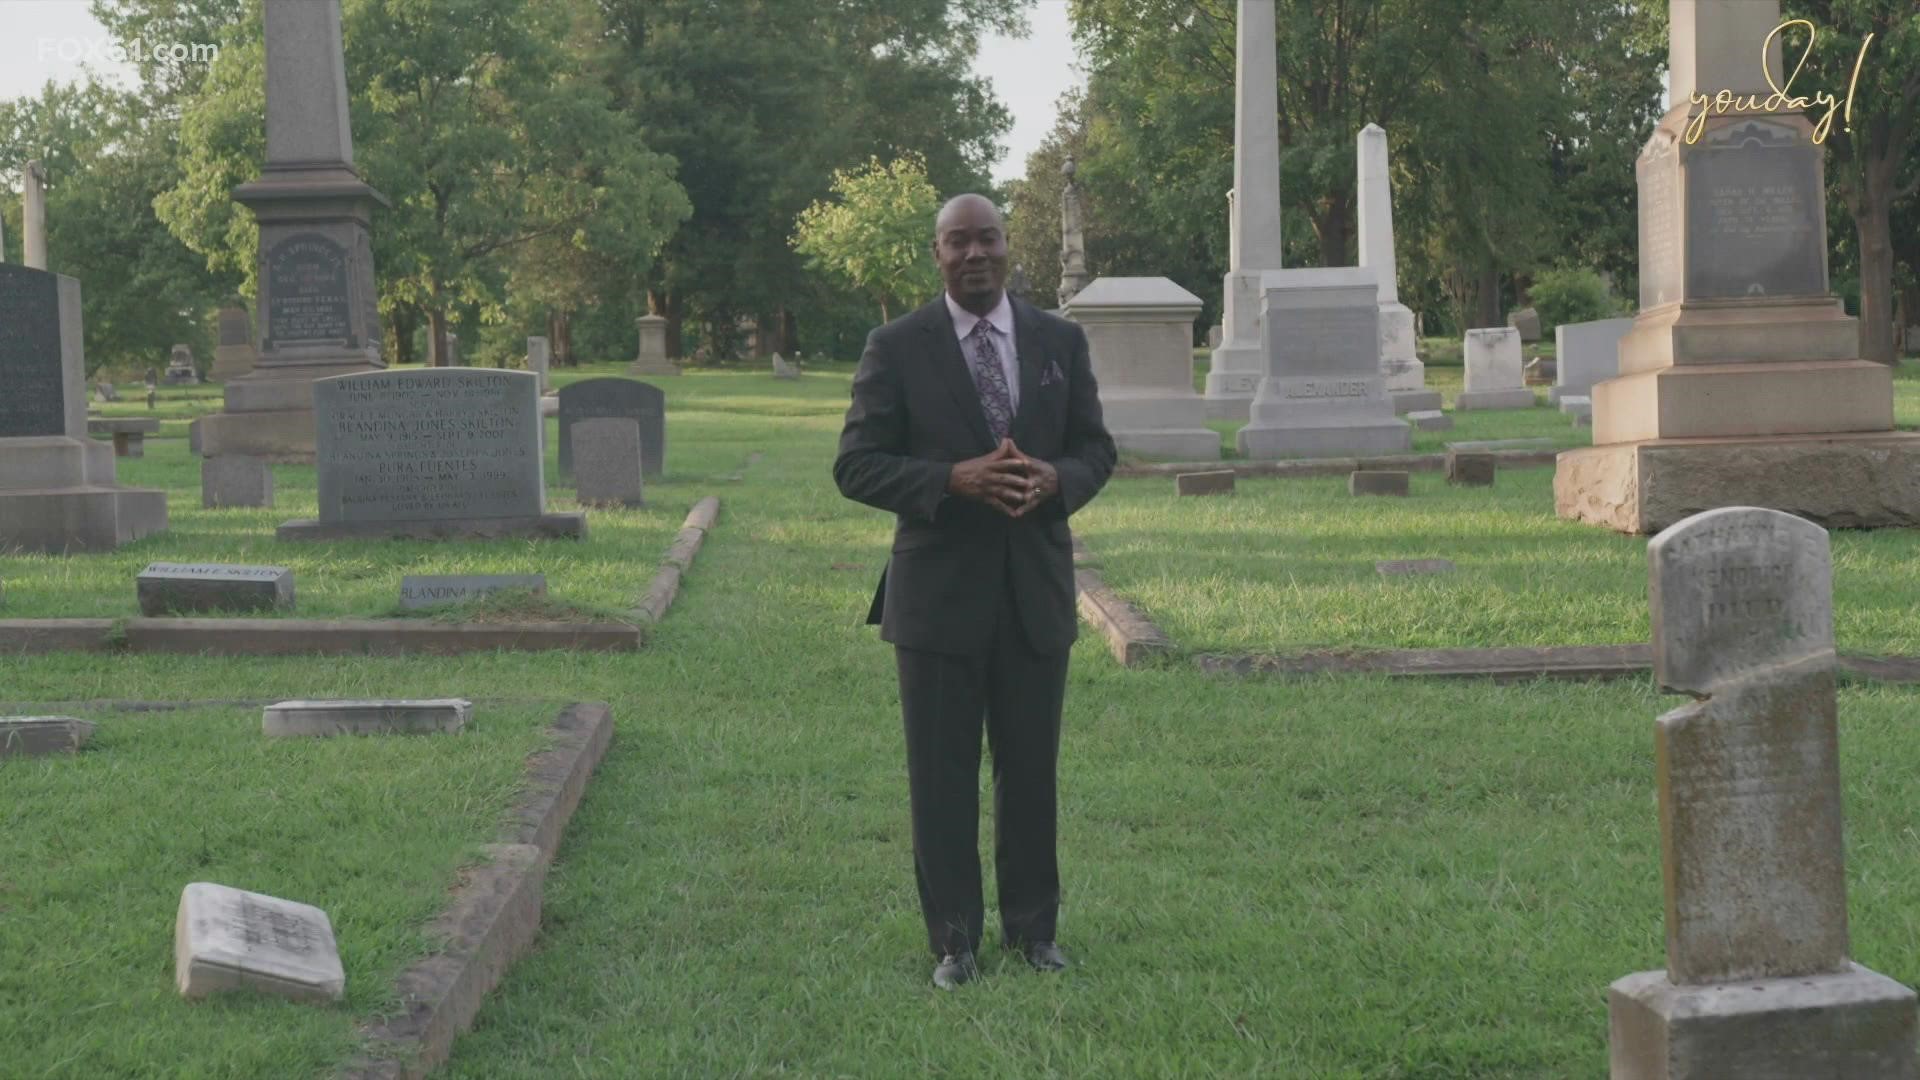 Coach LaMonte explains why he considers the cemetery the wealthiest place in the world. "Don't let the grave steal from you."